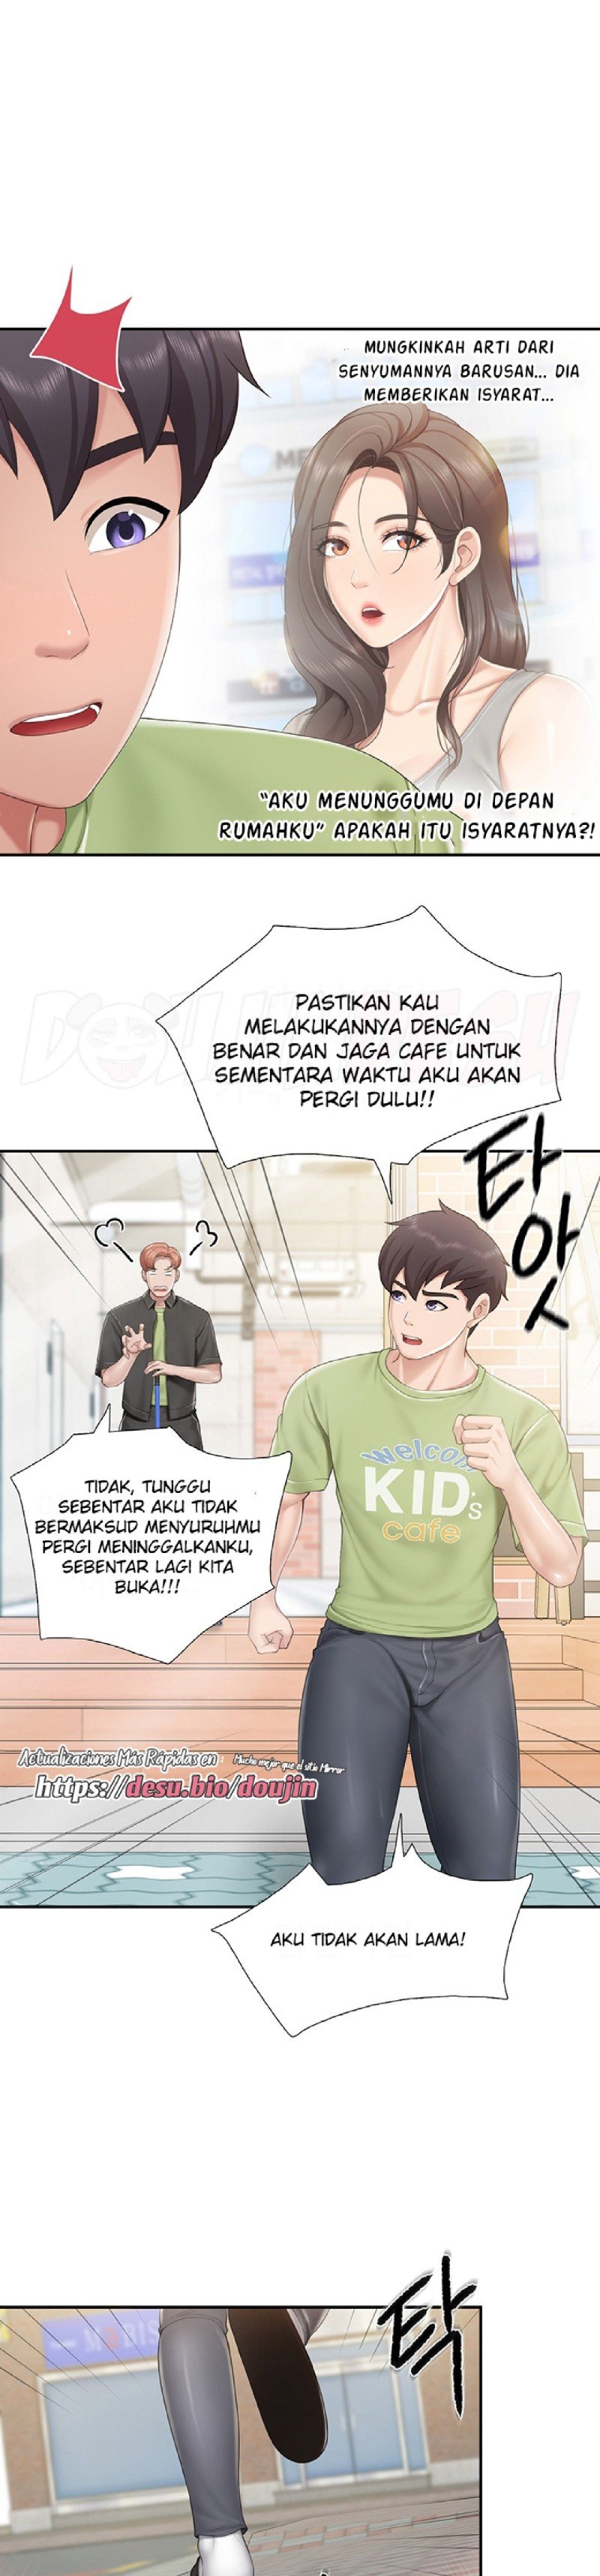 welcome-to-kids-cafe-raw-chap-71-14